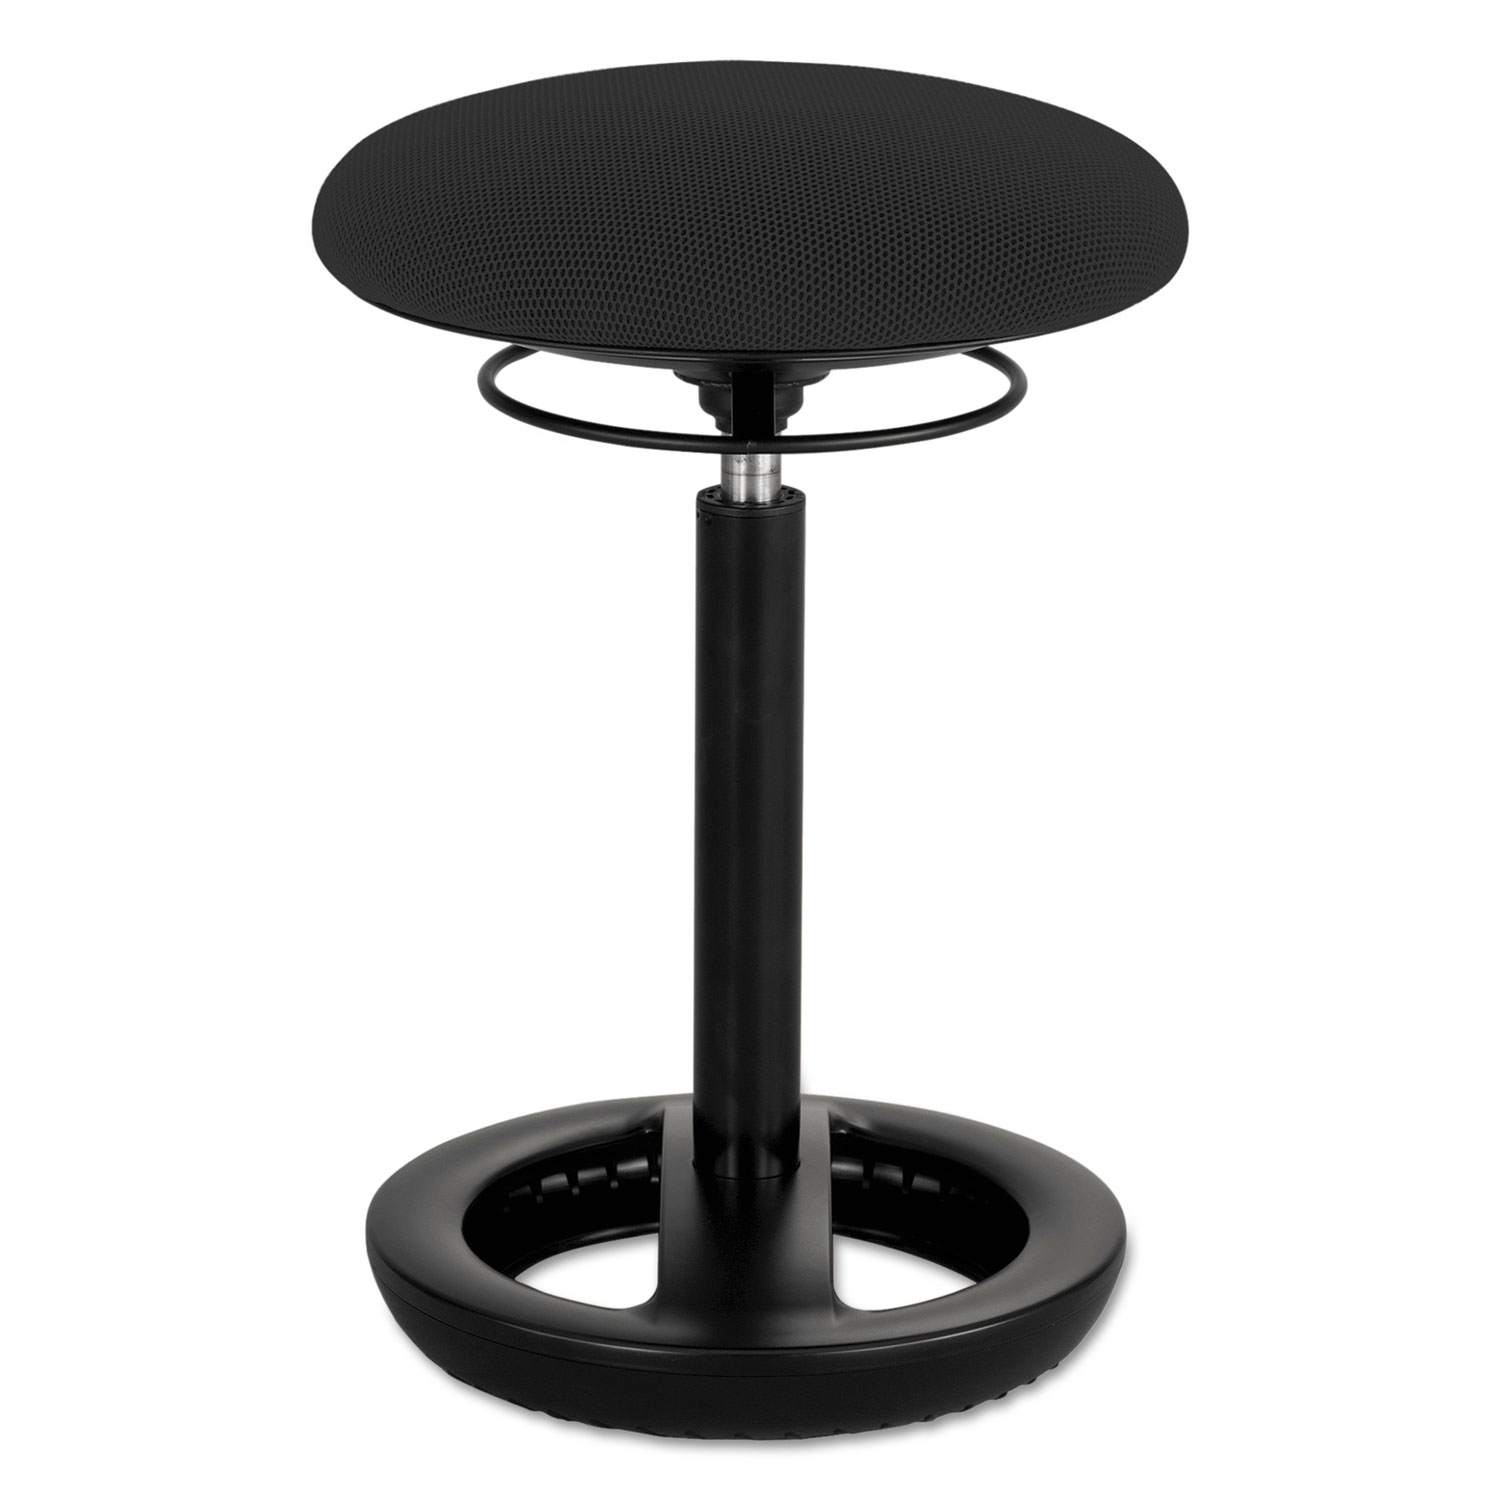  Safco 3000BL Twixt Desk Height Ergonomic Stool, 22.5 Seat Height, Supports up to 250 lbs., Black Seat, Black Back, Black Base (SAF3000BL) 